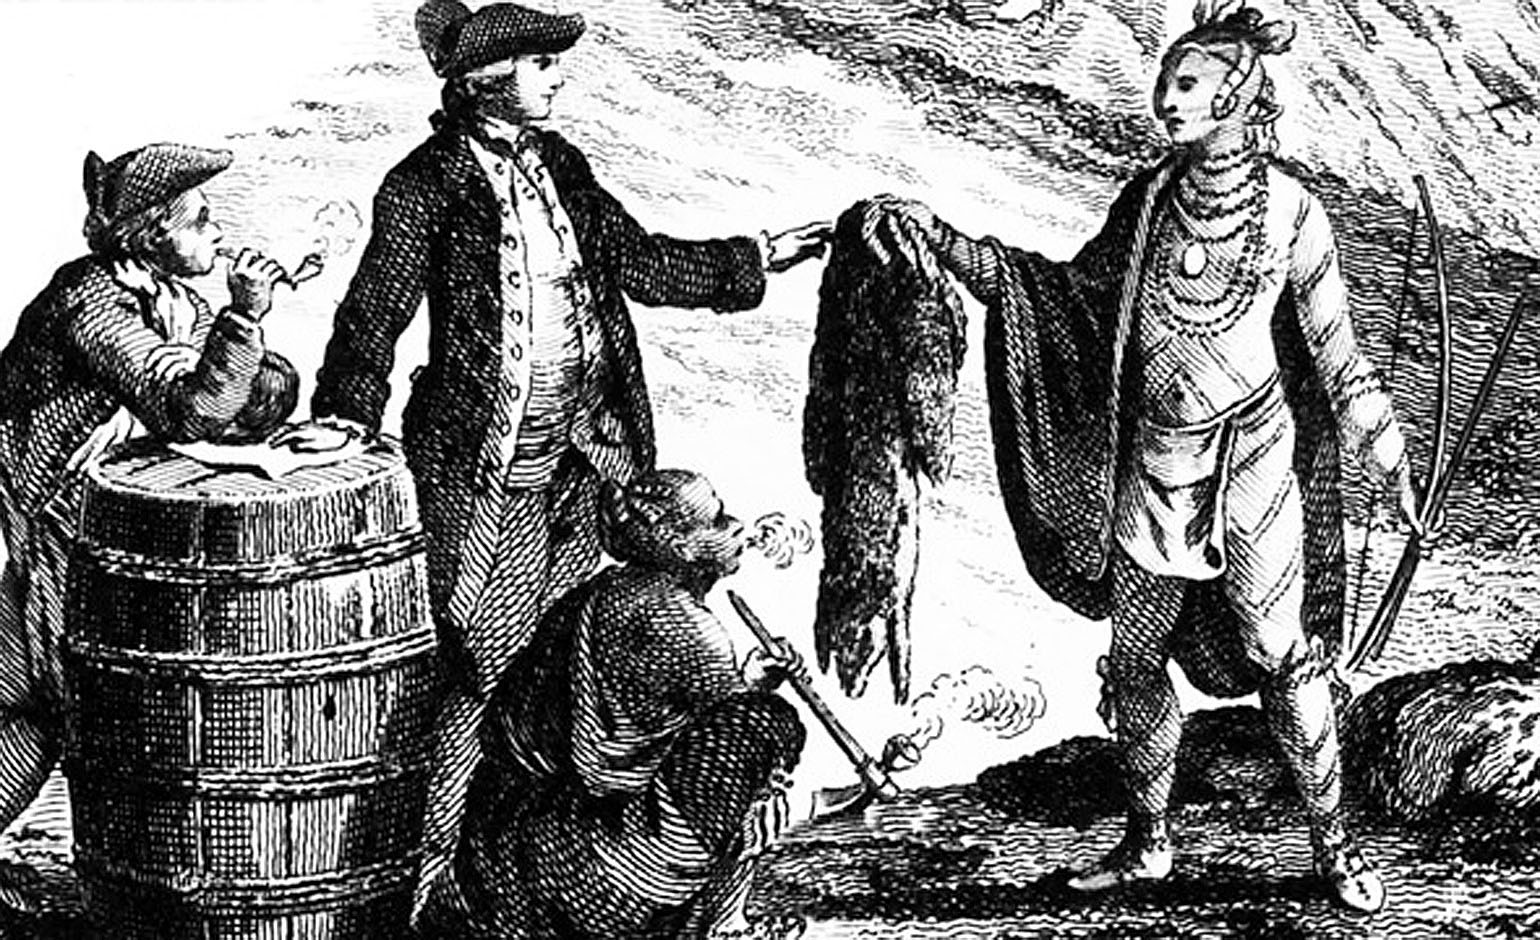 French traders exchanging European goods for furs trapped by Native Americans. Decorative detail from a 1777 map of Canada by William Faden. Courtesy of the Library of Congress, Geography and Map Division.